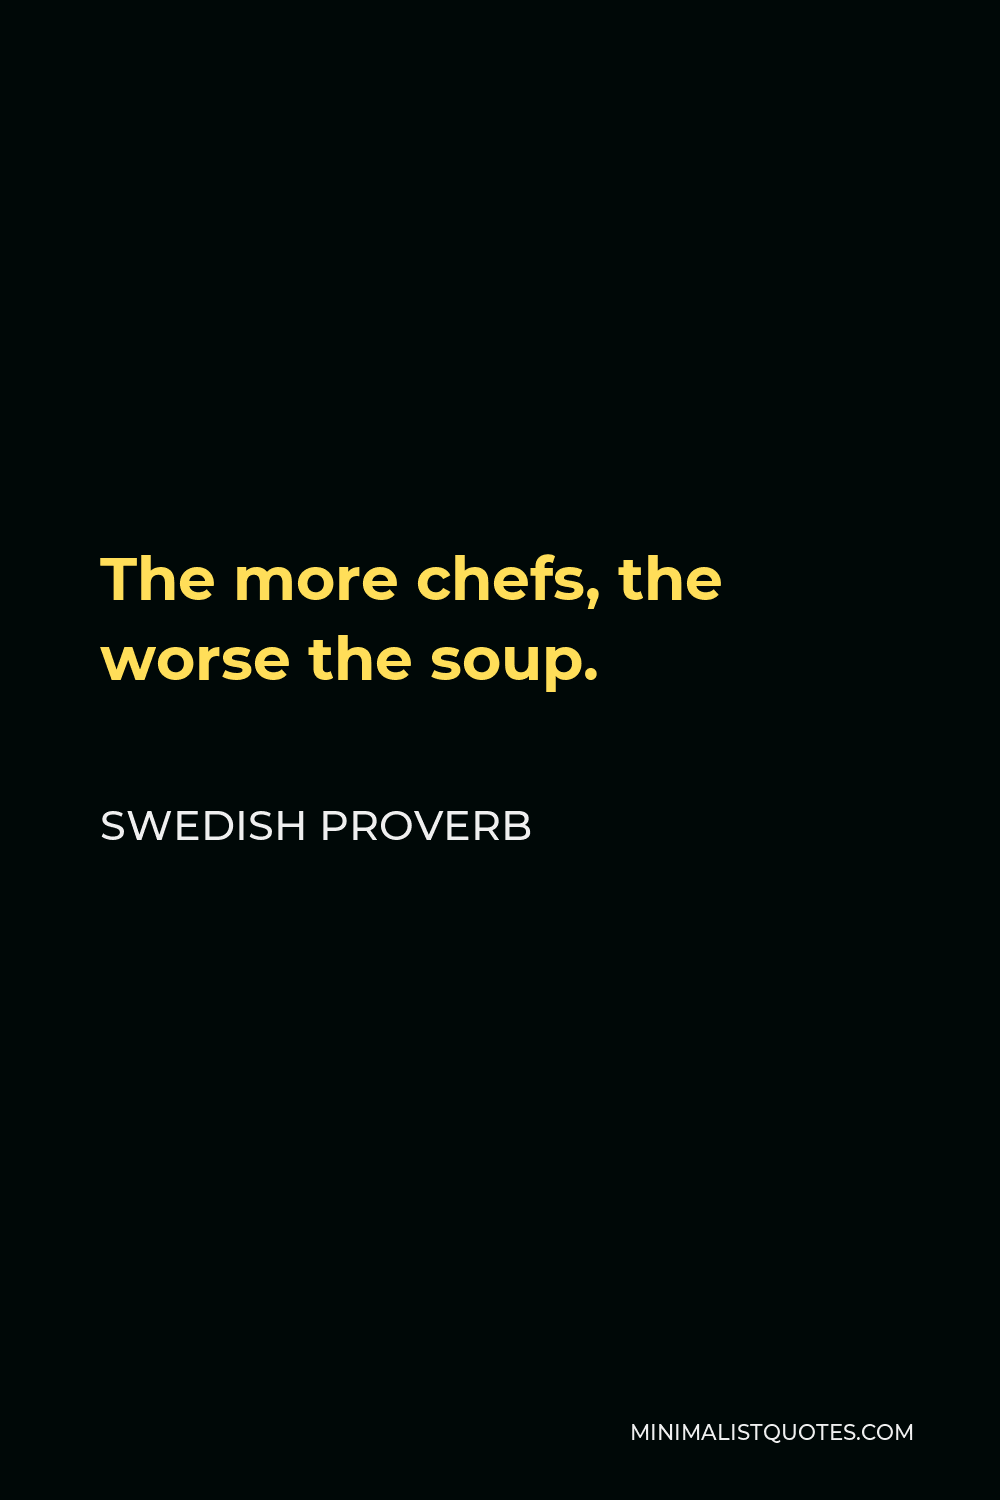 Swedish Proverb Quote - The more chefs, the worse the soup.